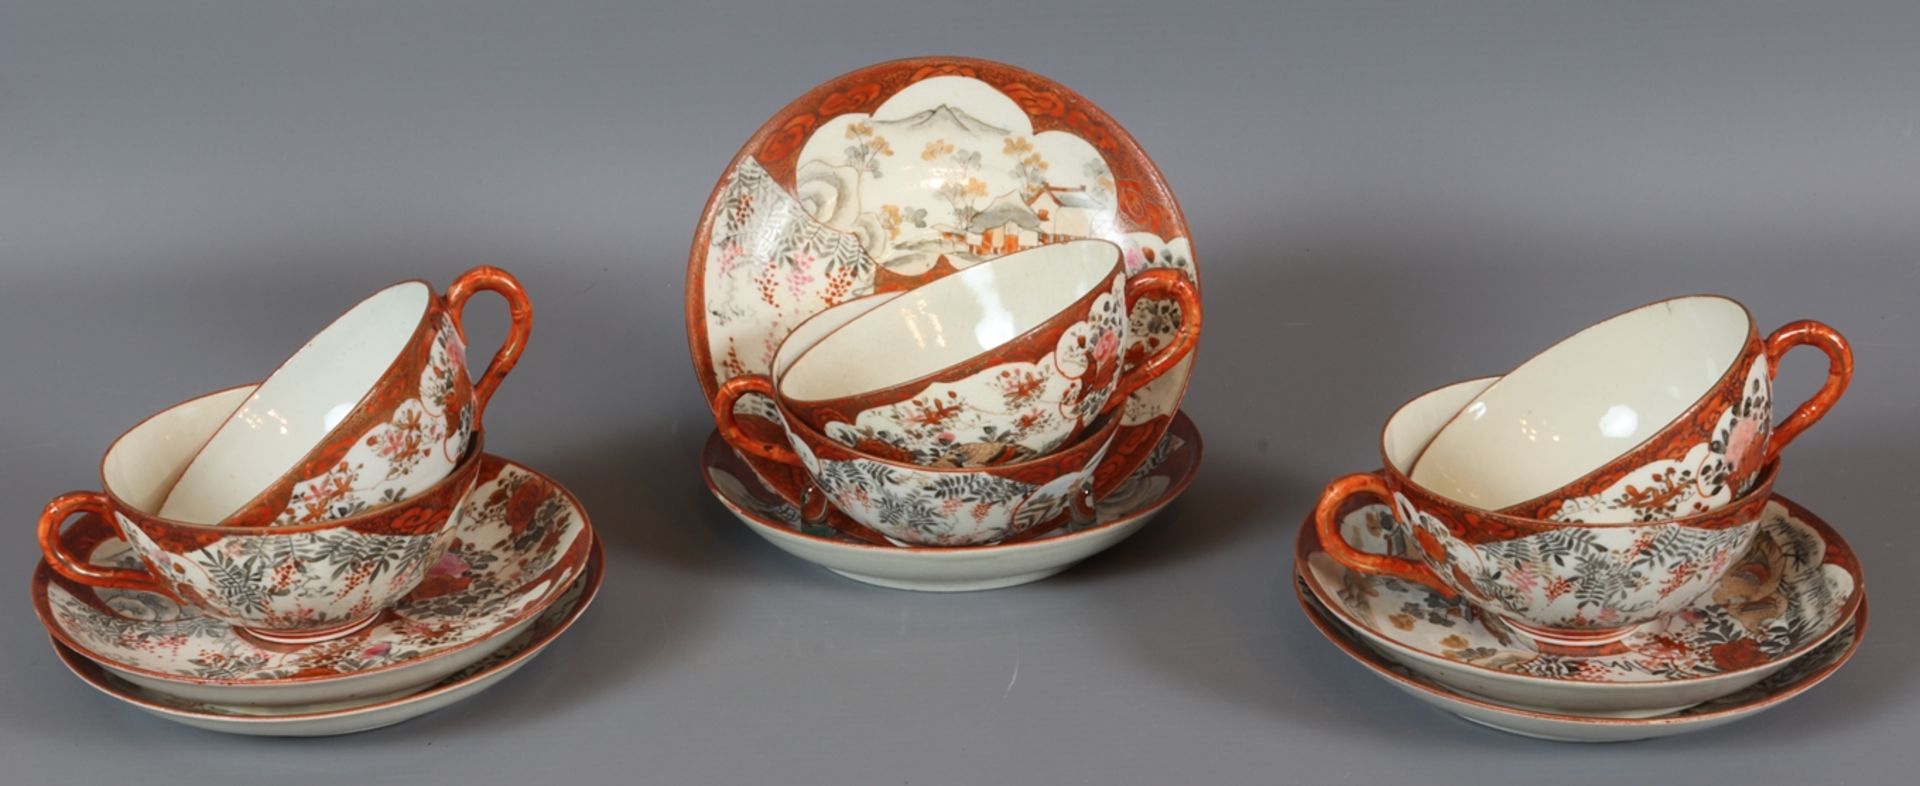 Asian tea service for 6 persons, China circa 1900 - Image 4 of 6